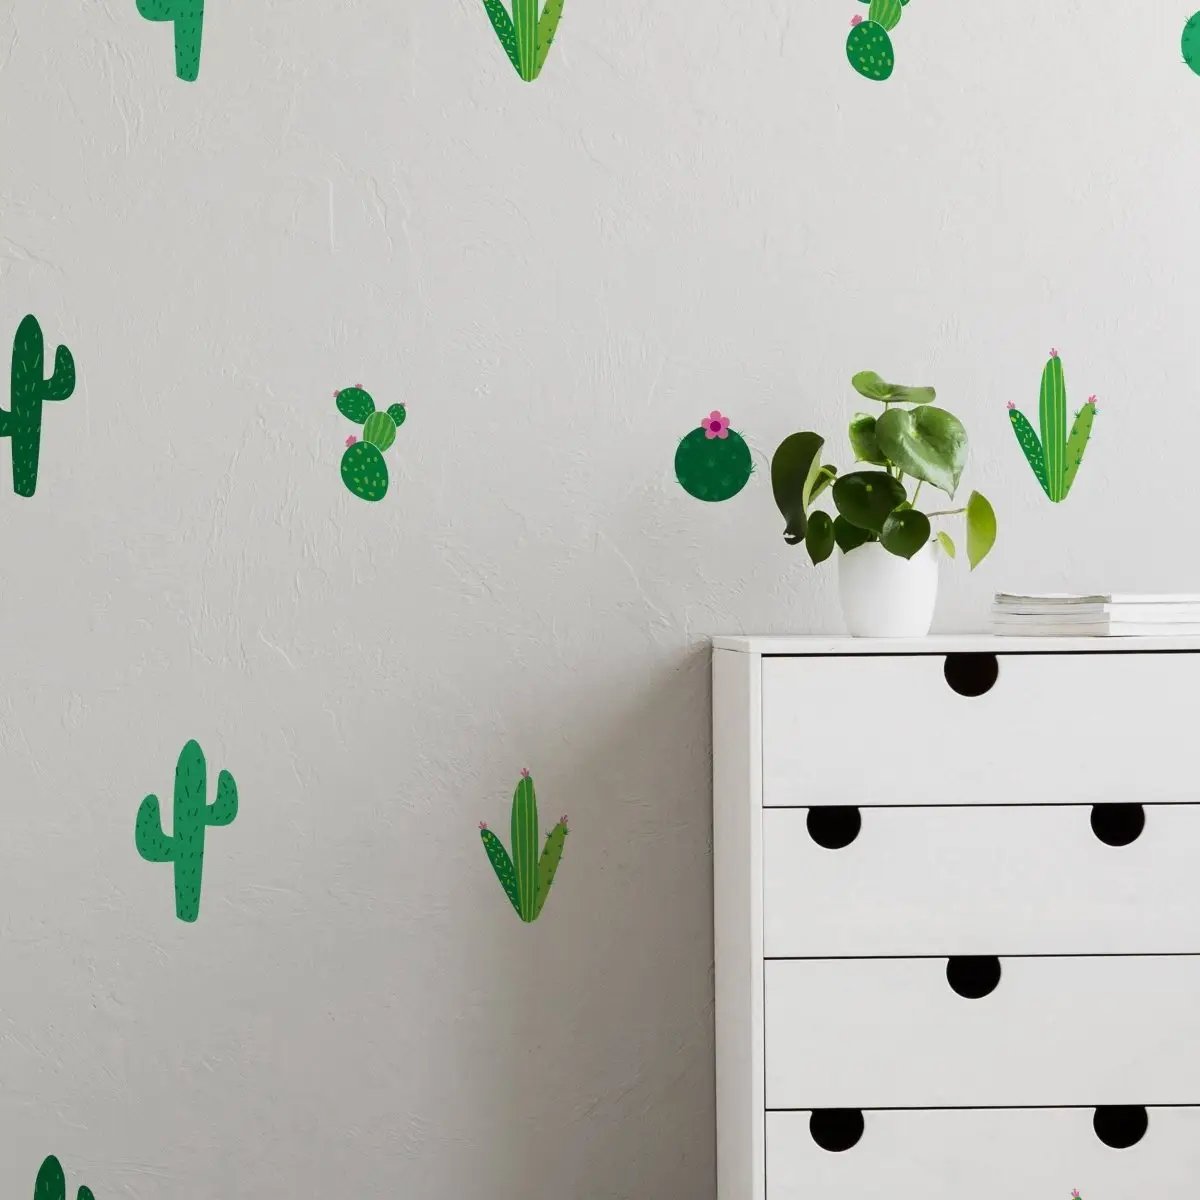 Cactus Oasis Vinyl Wall Decals - Transform Your Space with Nature - Decords